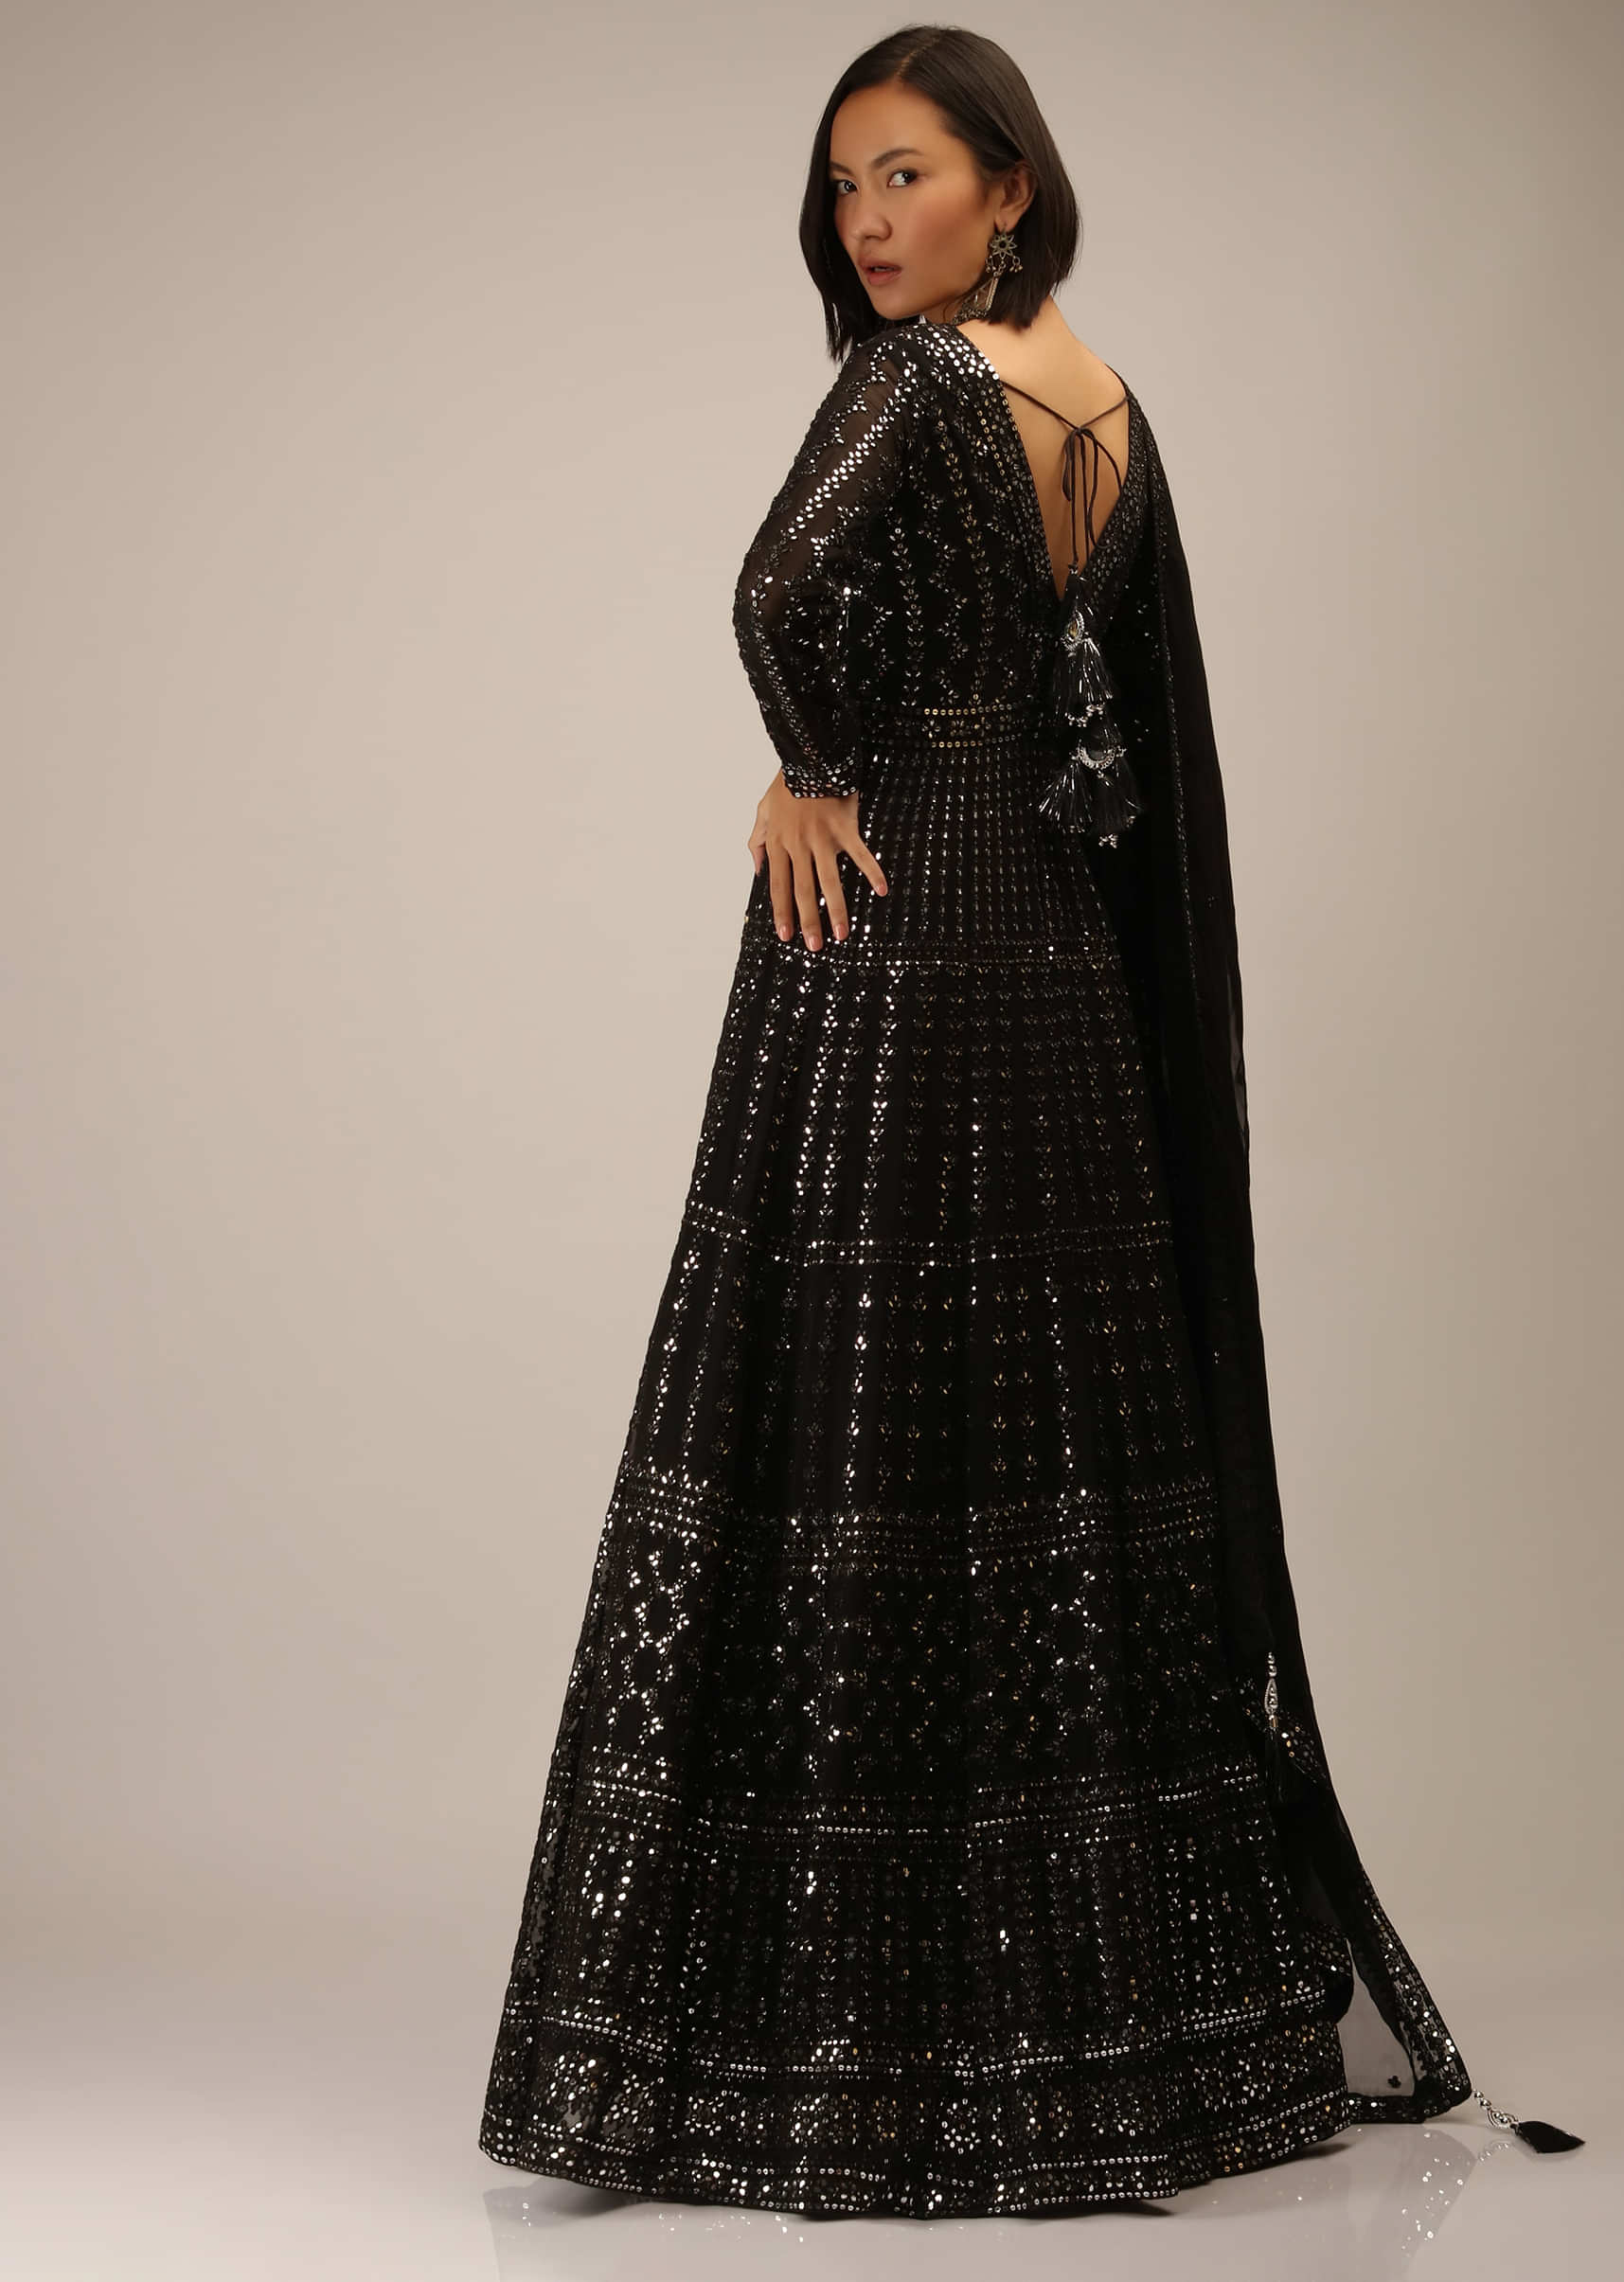 Black Anarkali Suit In Georgette With Sequins And Mirror Embroidery All Over And Full Sleeves